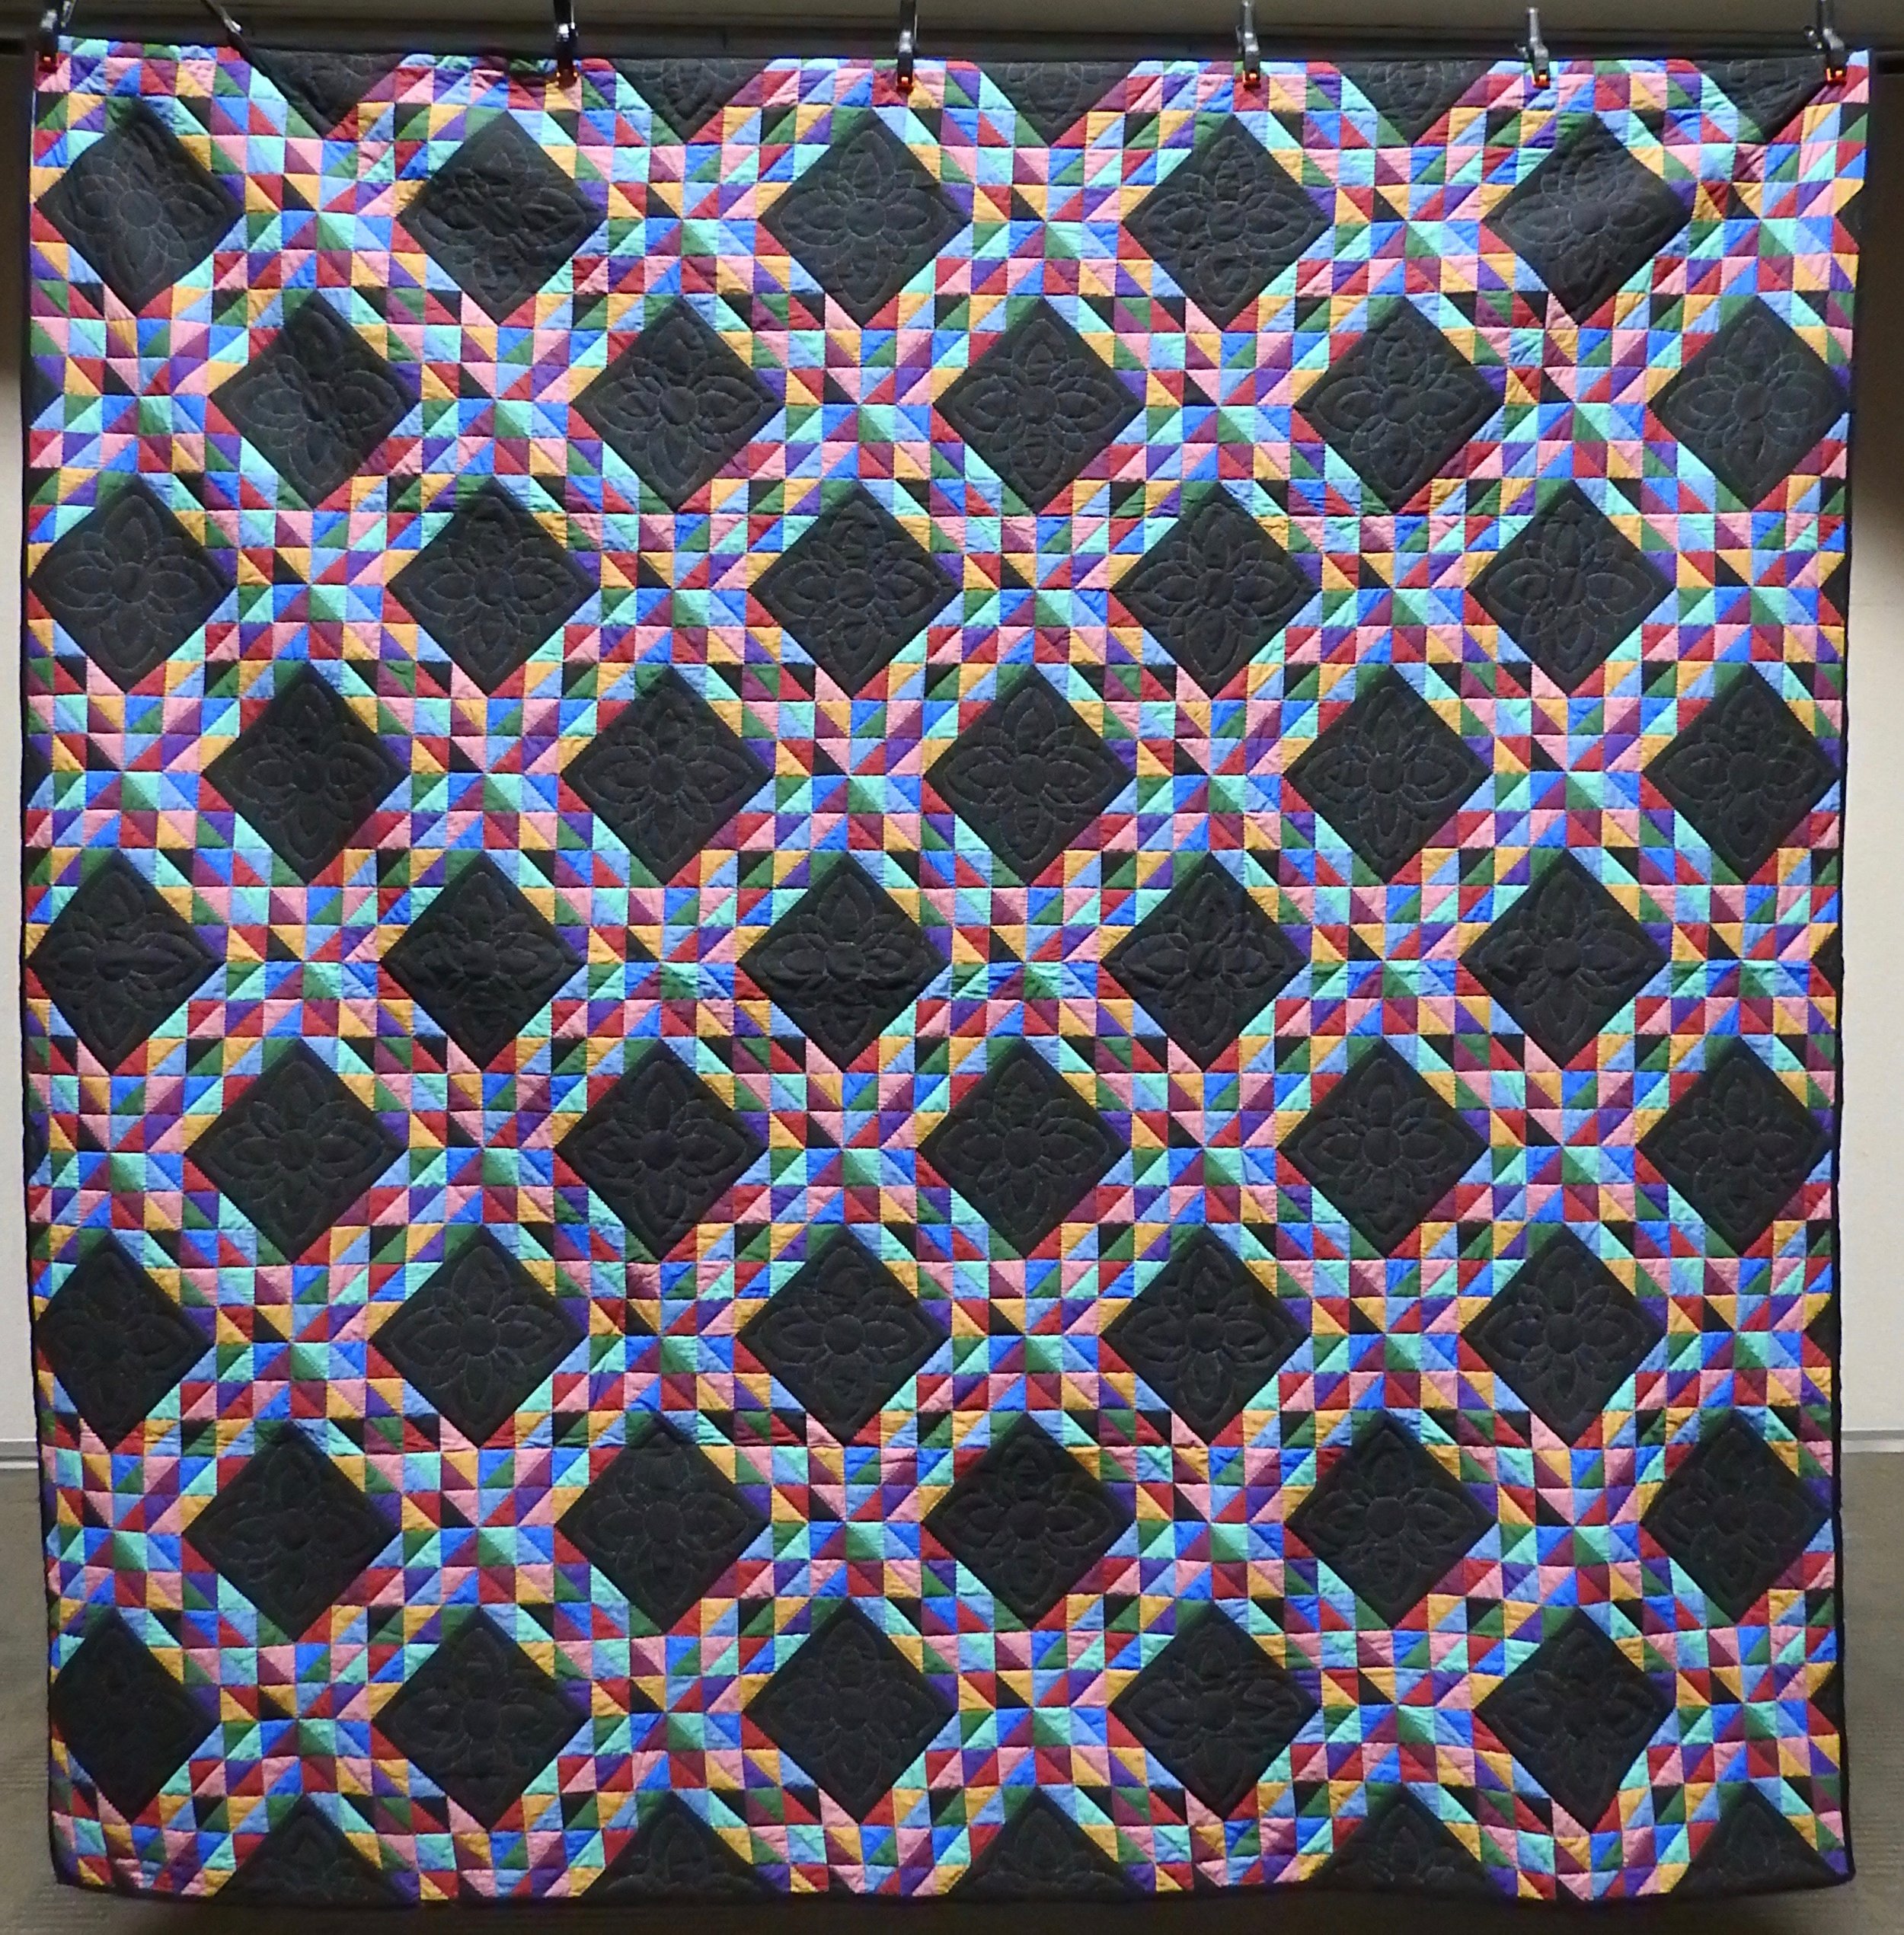  Amish Triangles, Pre-printed fabric, Single Needle Hand Quilted, Clinton Frame Church, 87 x 87”